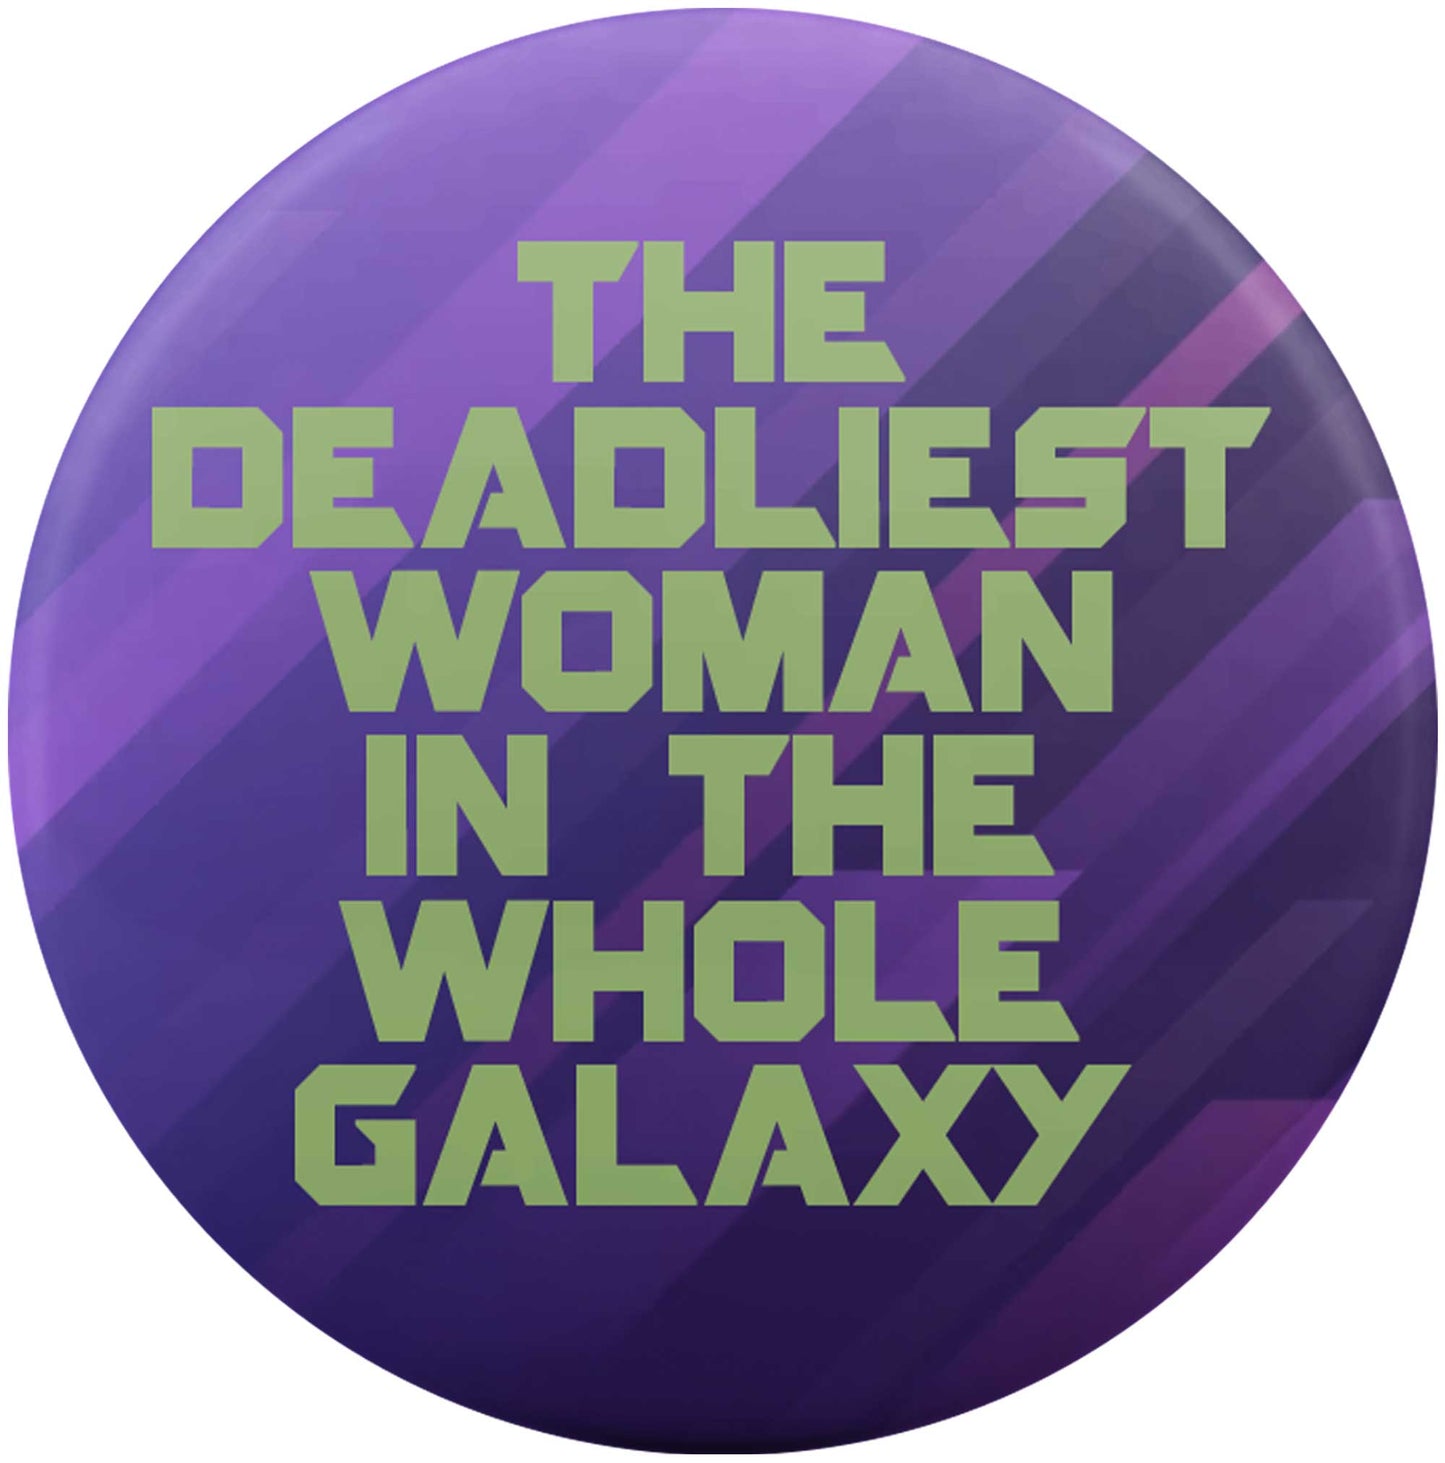 The Deadliest Woman In The Whole Galaxy